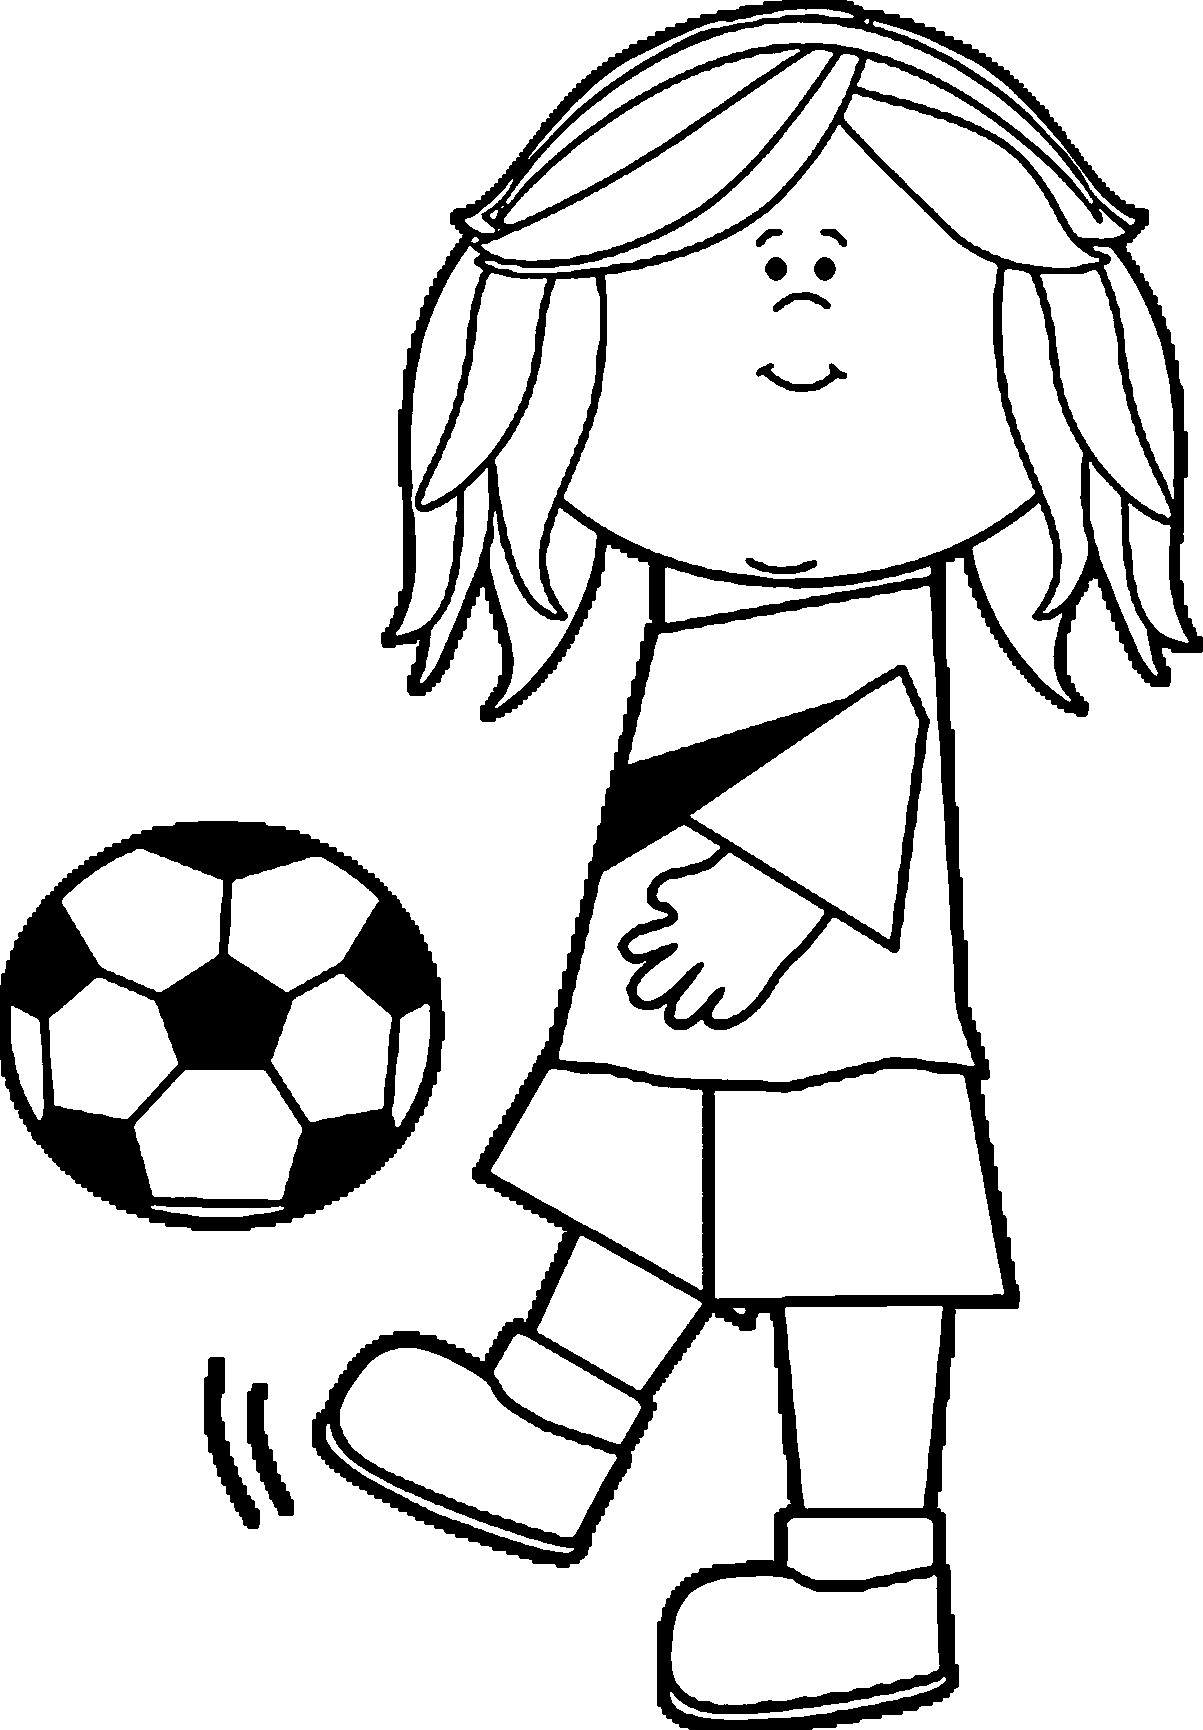 Girl Soccer Player Coloring Pages
 Soccer Girl Playing Football Coloring Page